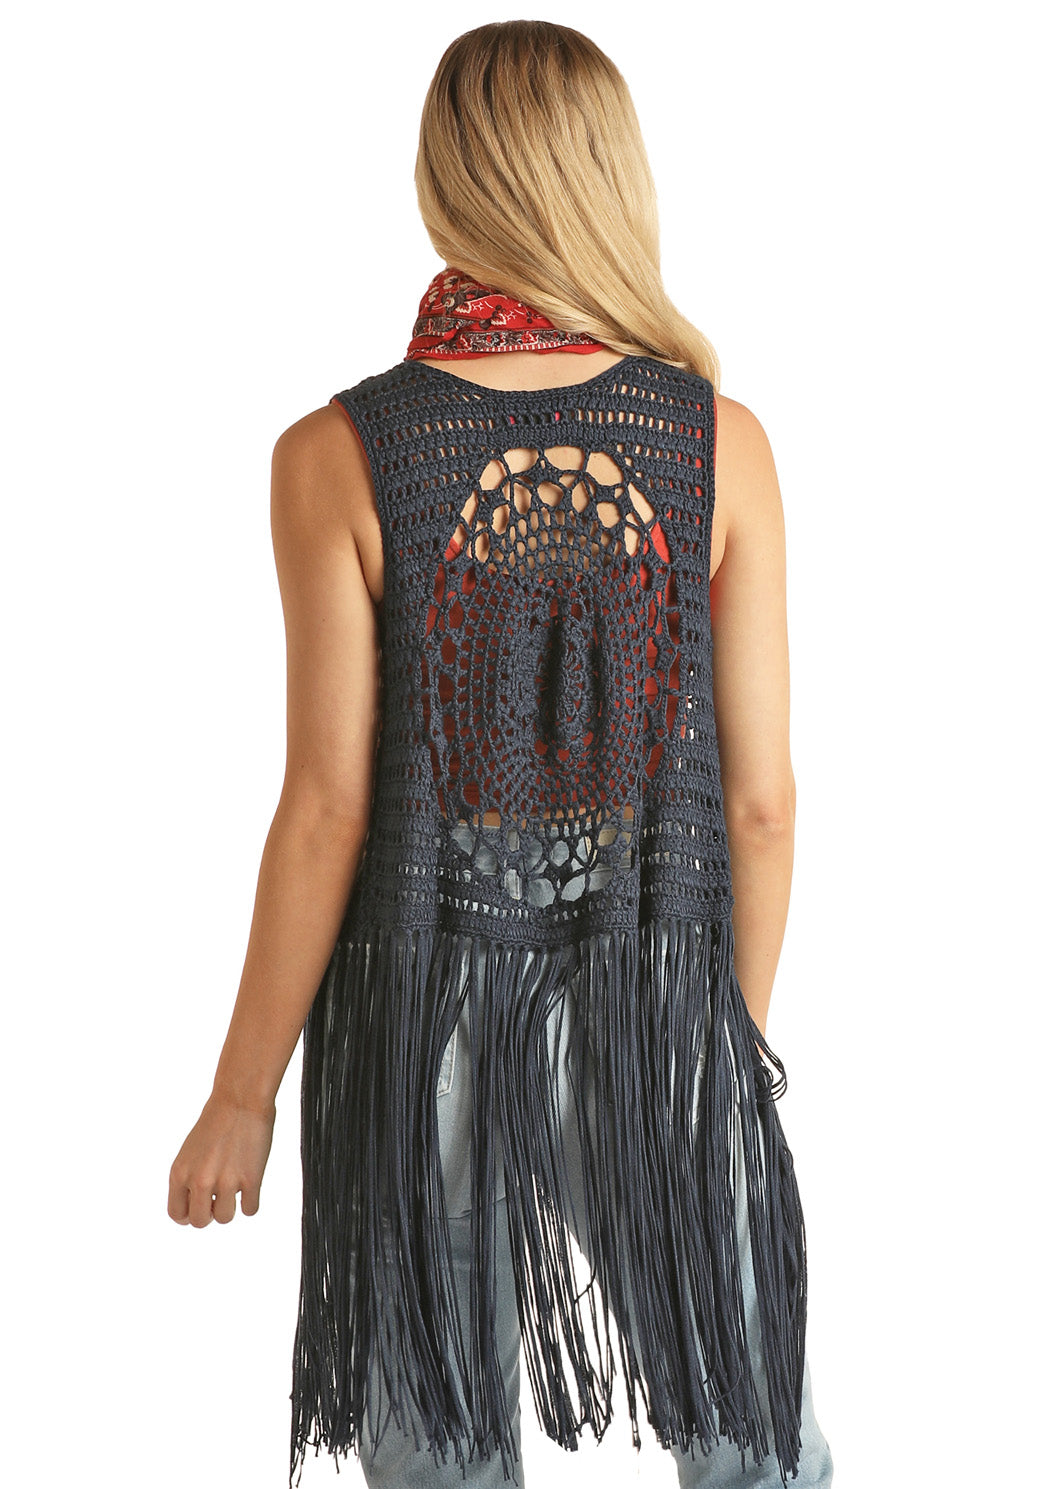 Rock and Roll Women's Navy Vest with Fringe at Hem